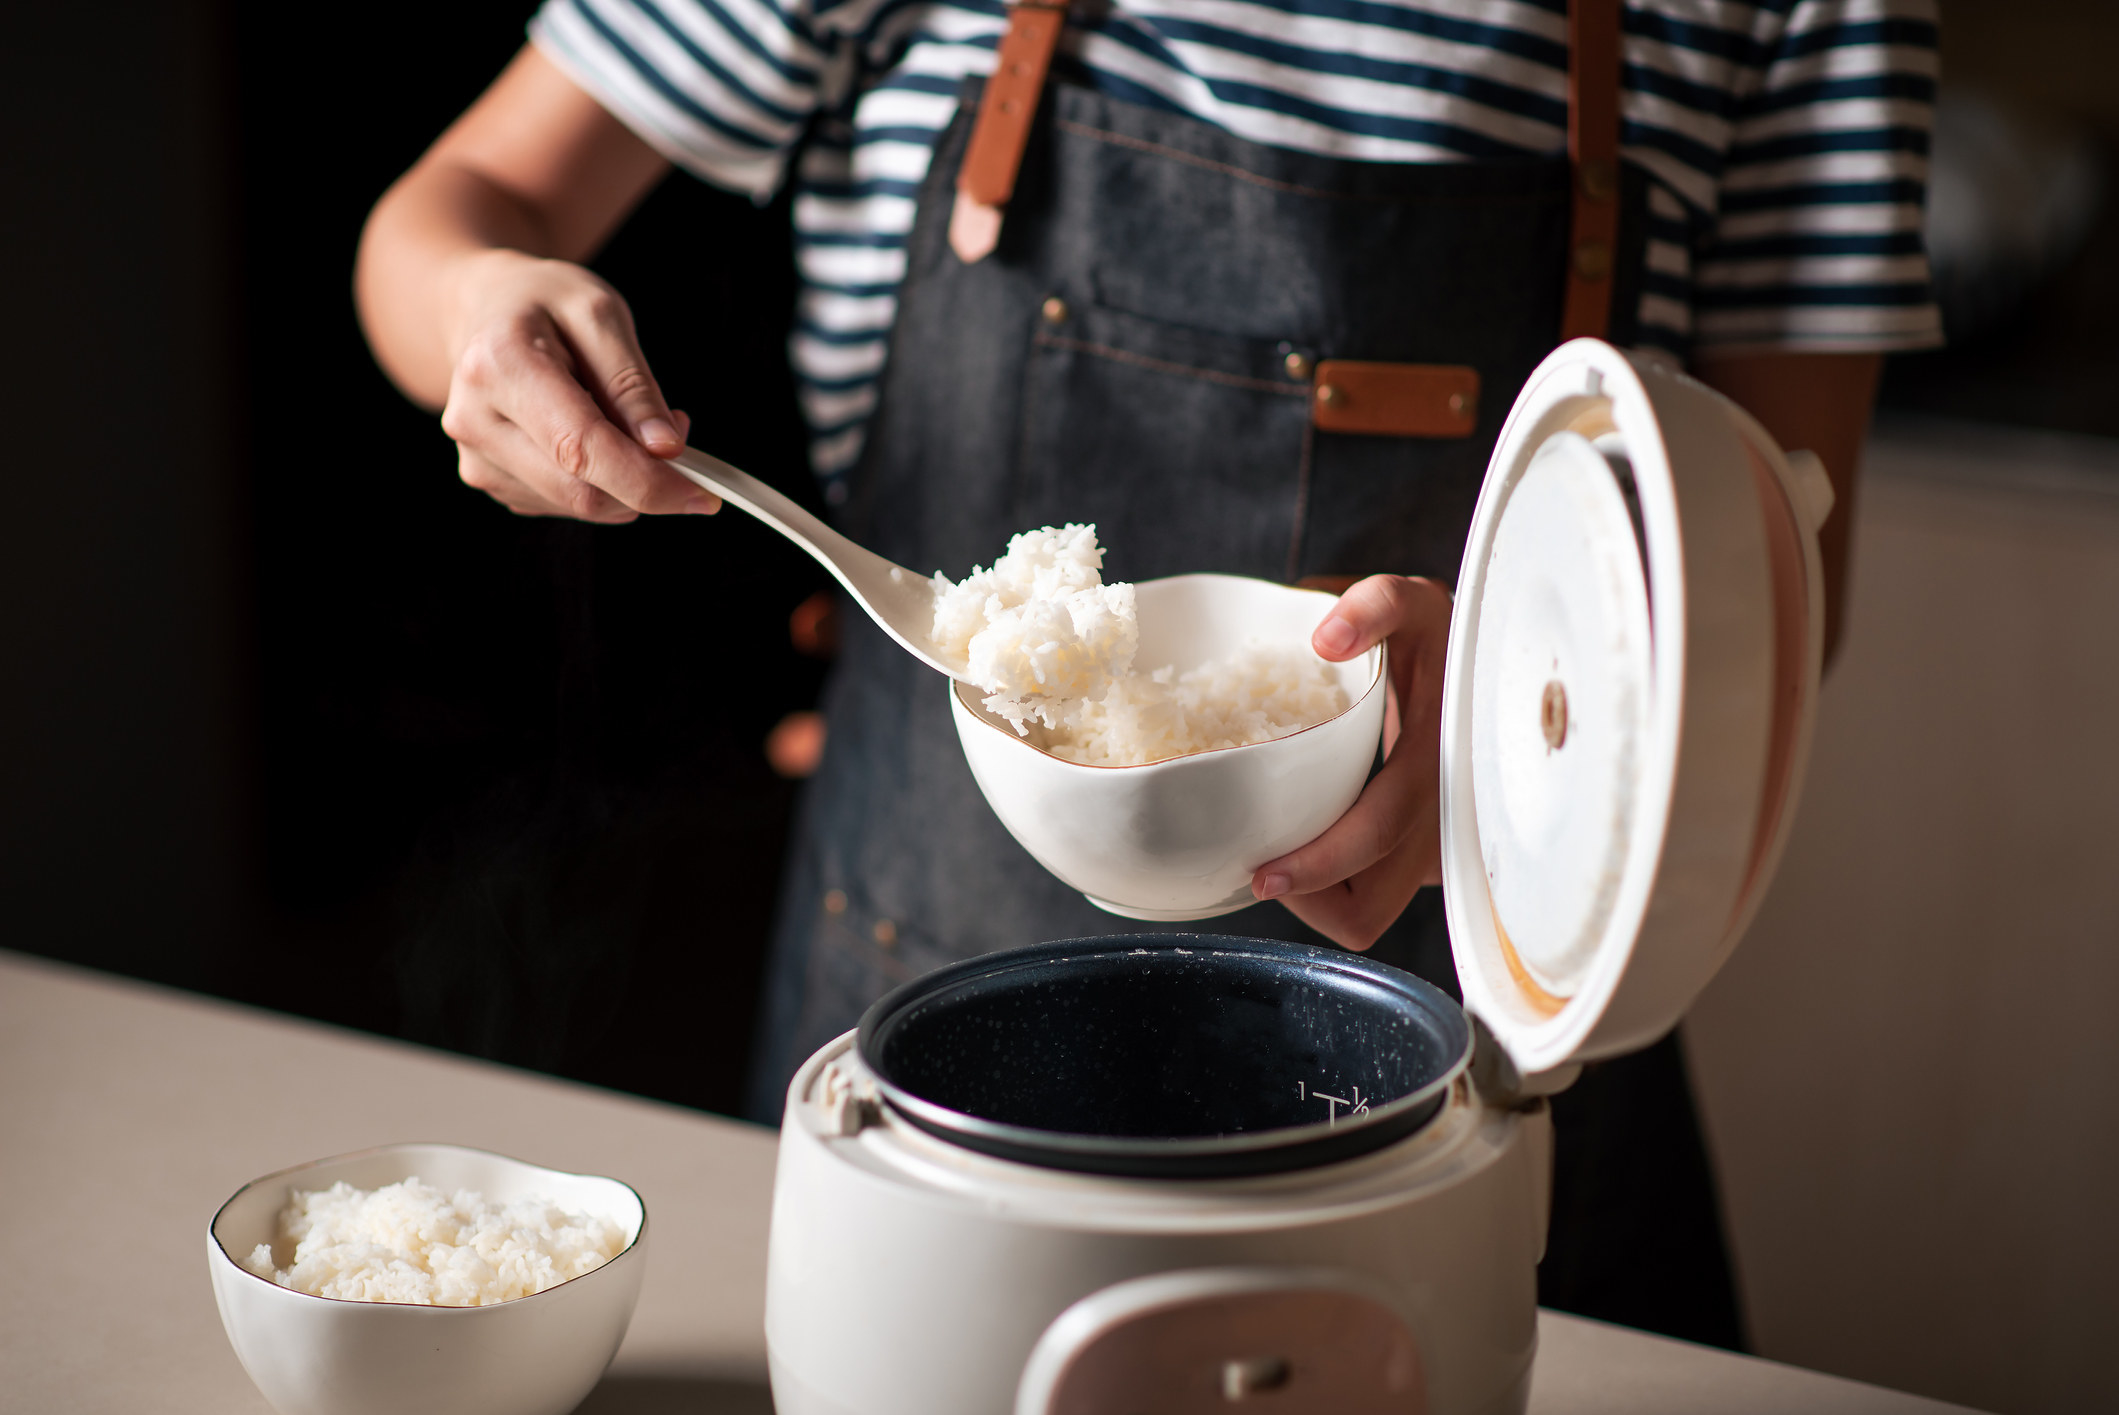 hand scooping out rice into a bowl from the rice cooker